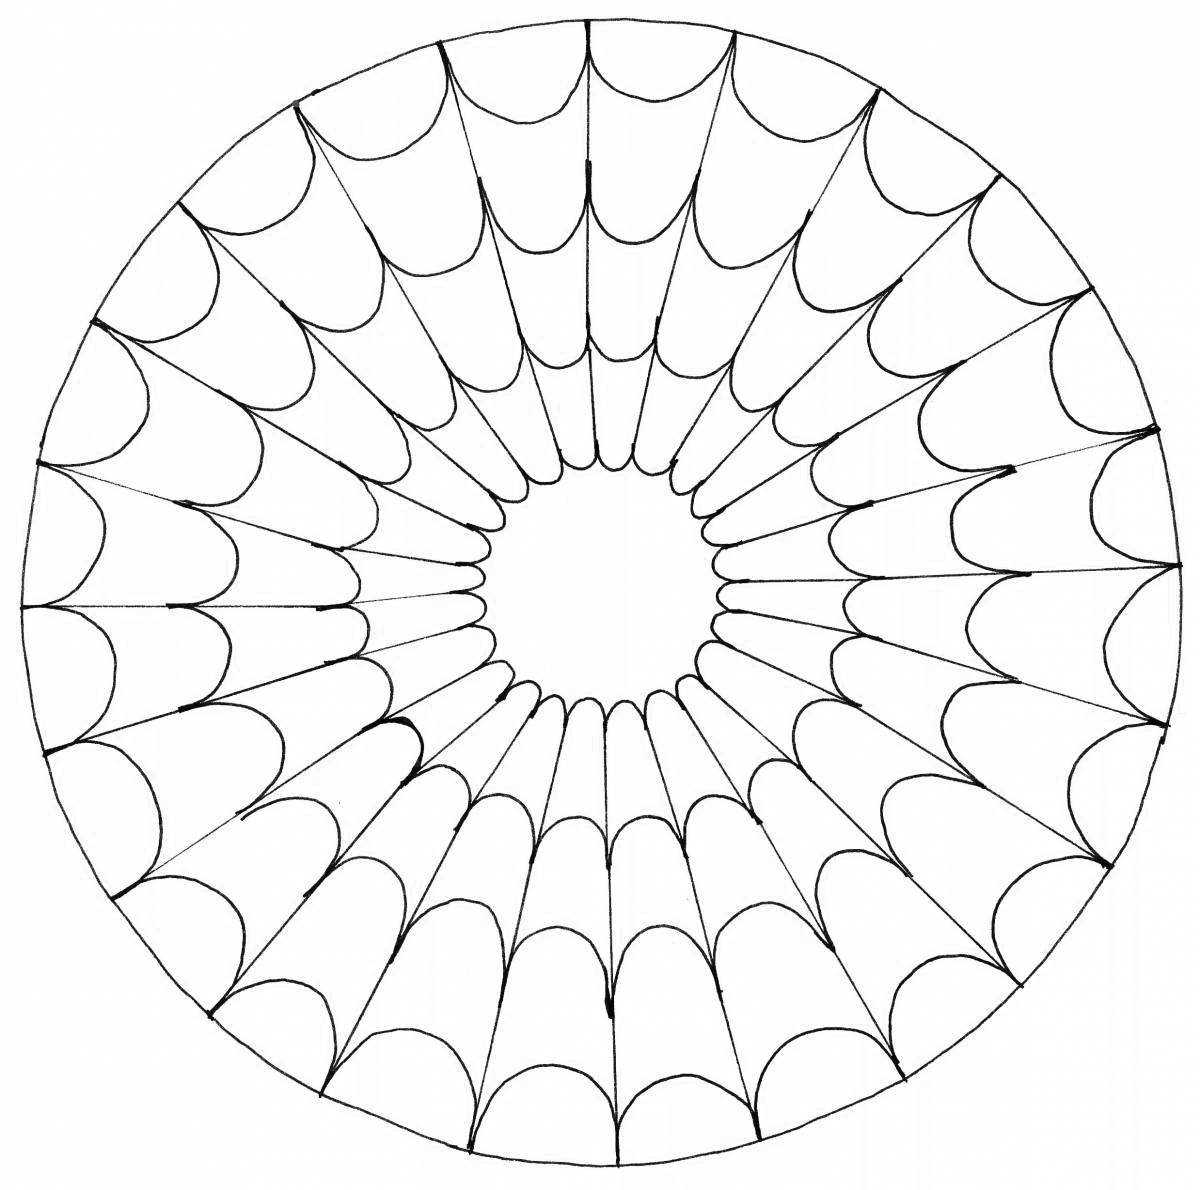 Adorable round spiral coloring page